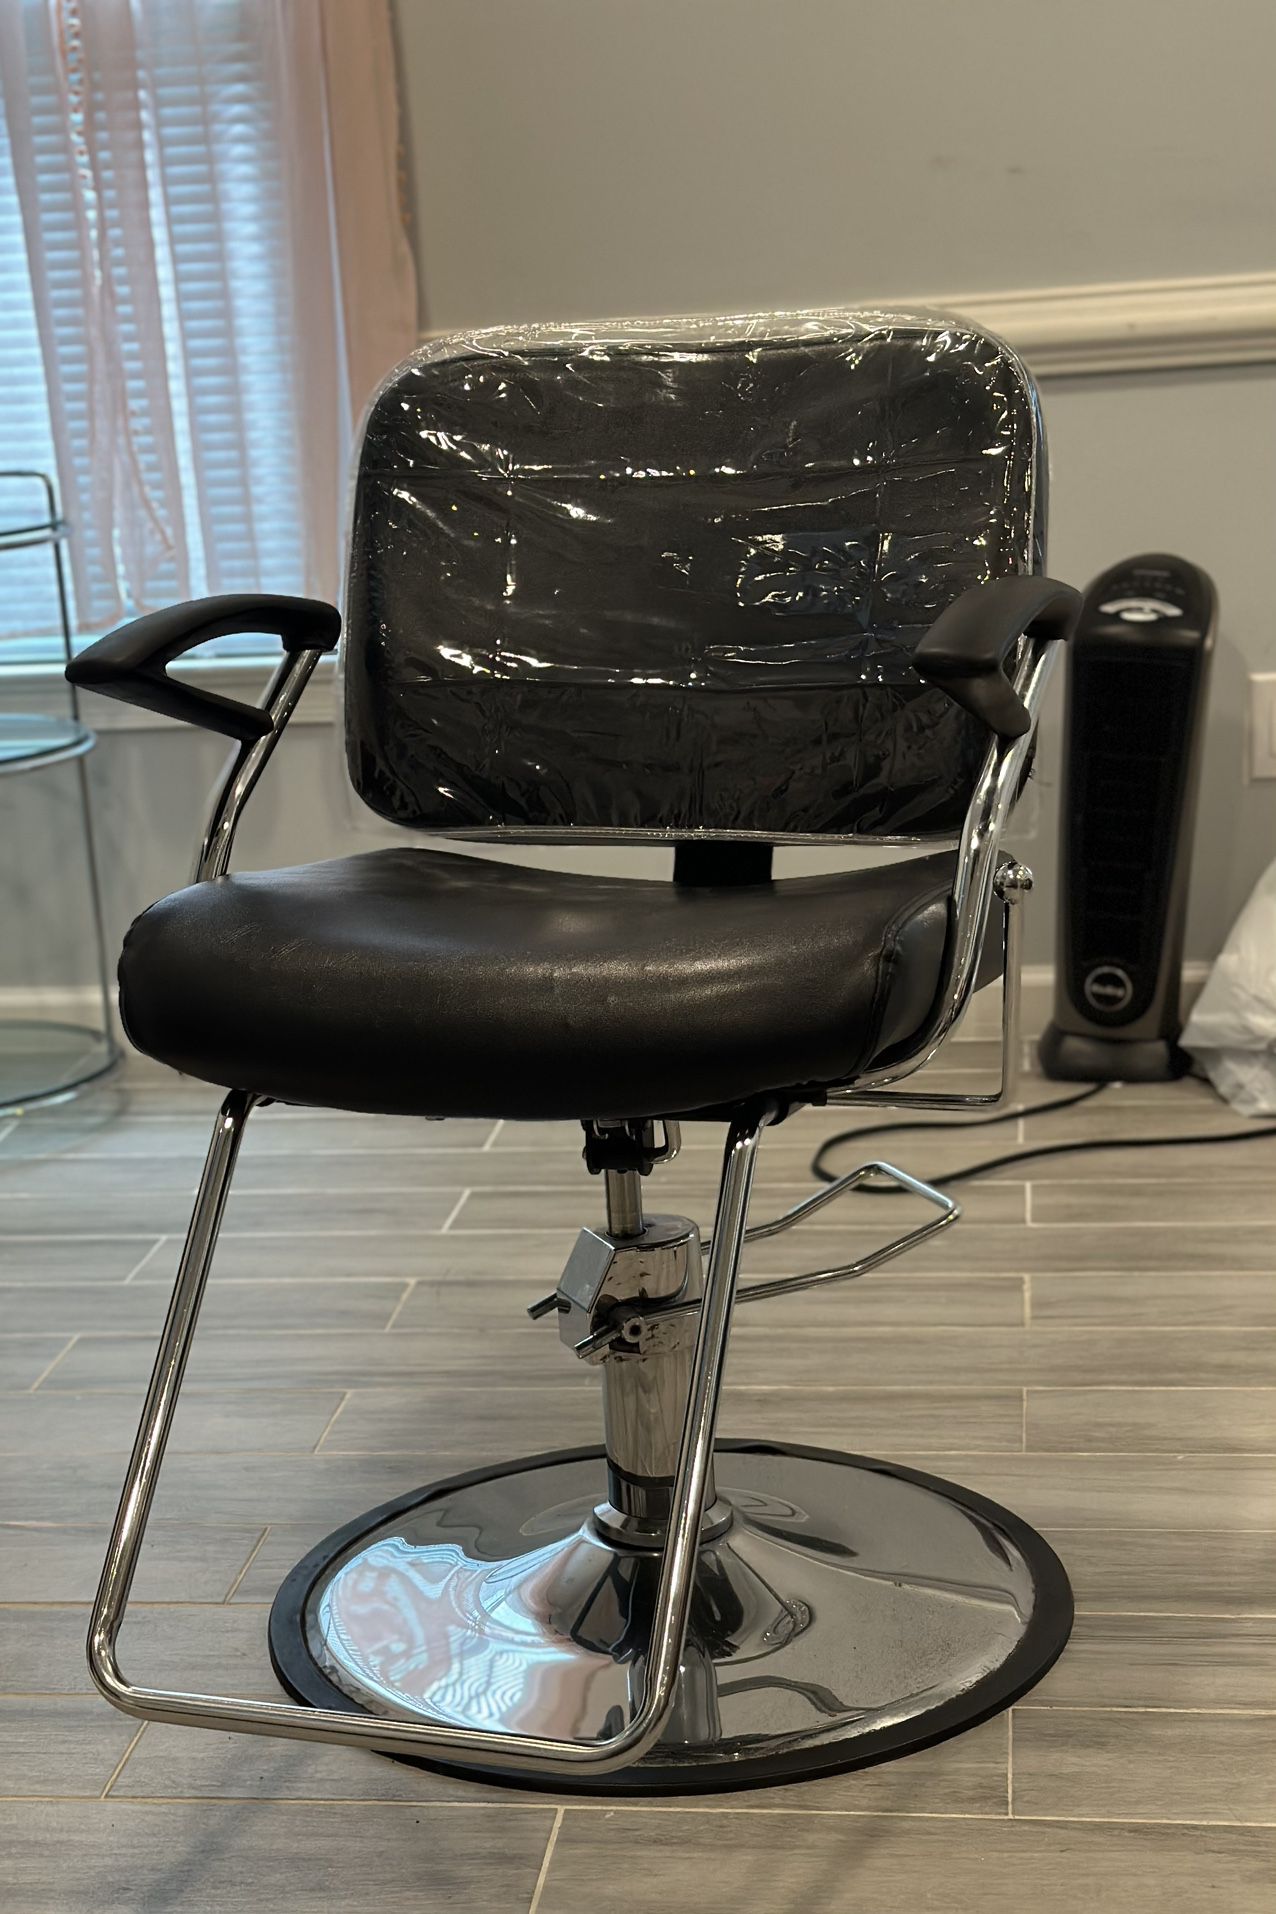 Reclinables Shampoo Or Waxing Chair 